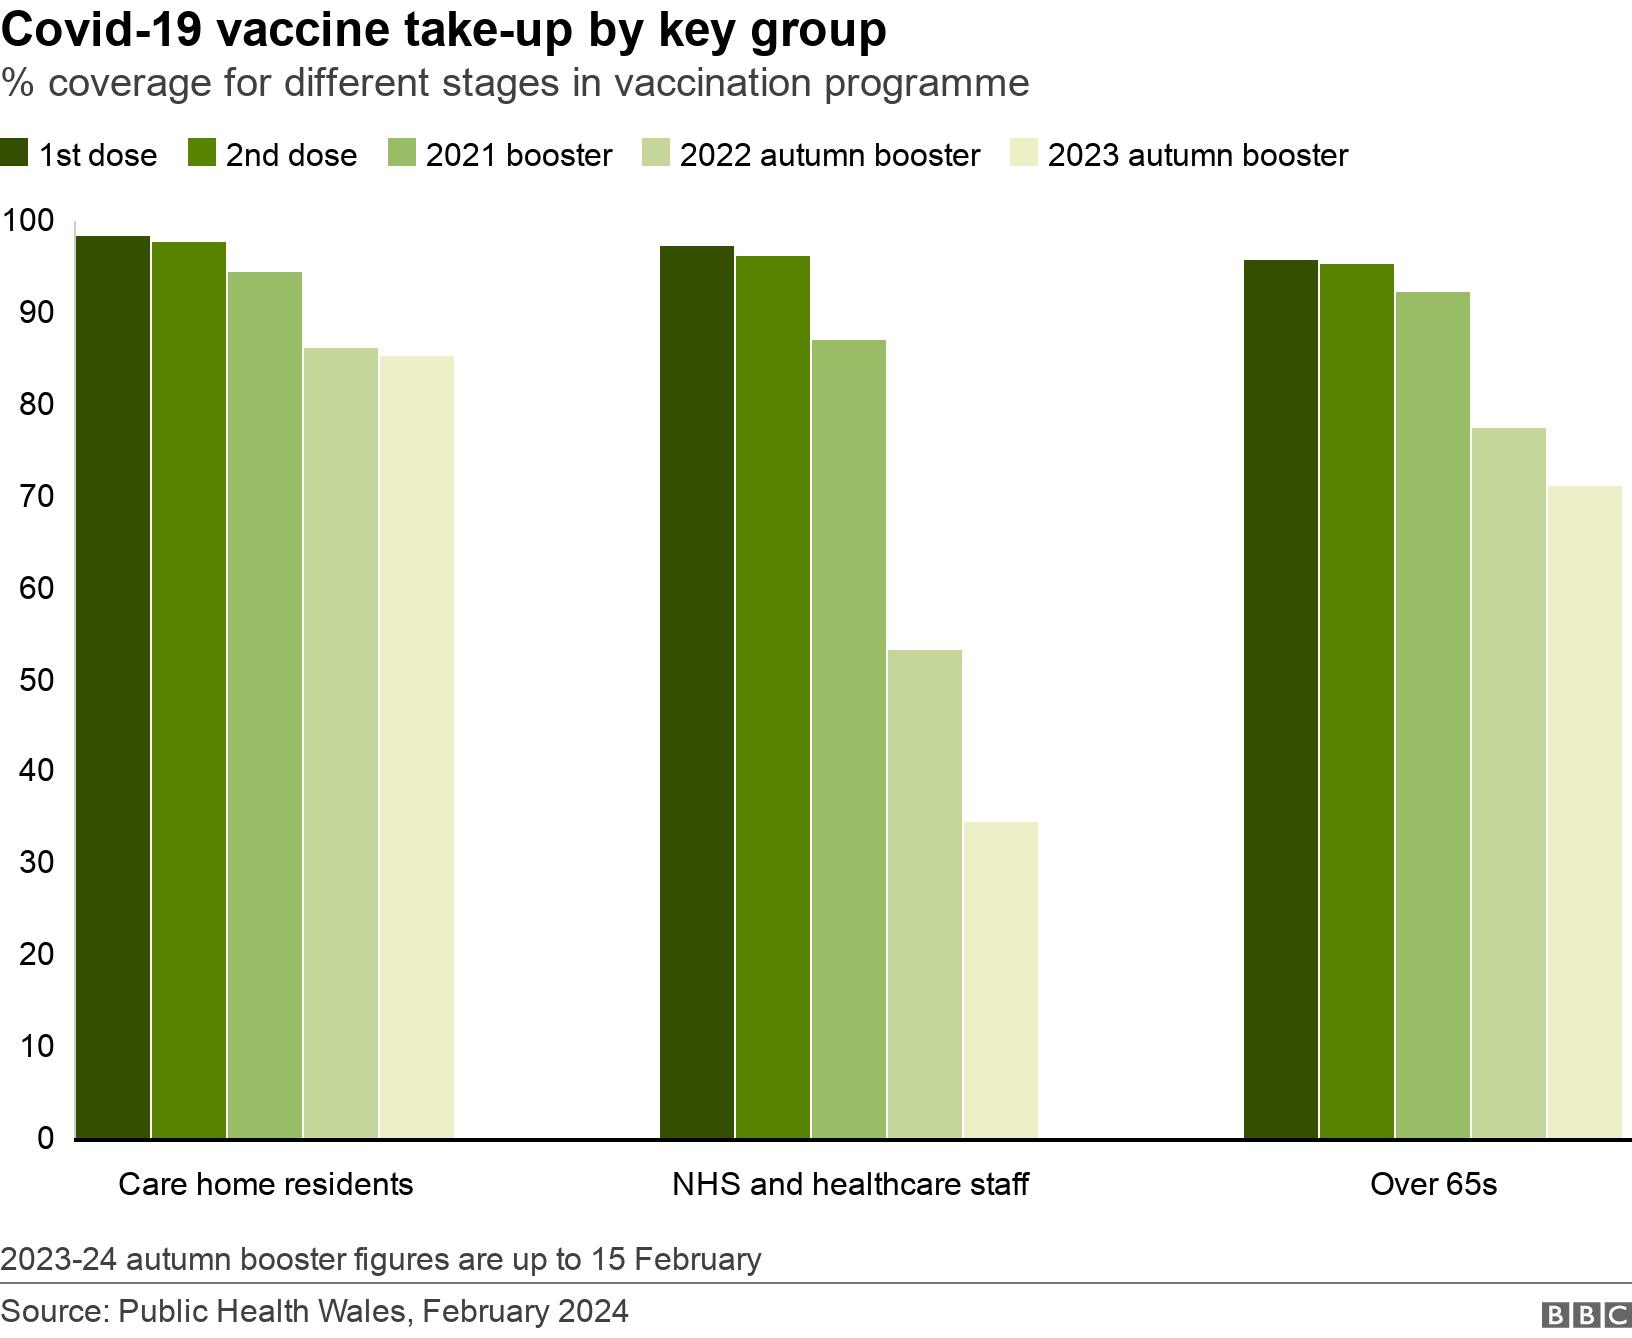 Covid-19 vaccine take-up by key group. % coverage for different stages in vaccination programme.  2023-24 autumn booster figures are up to 15 February.